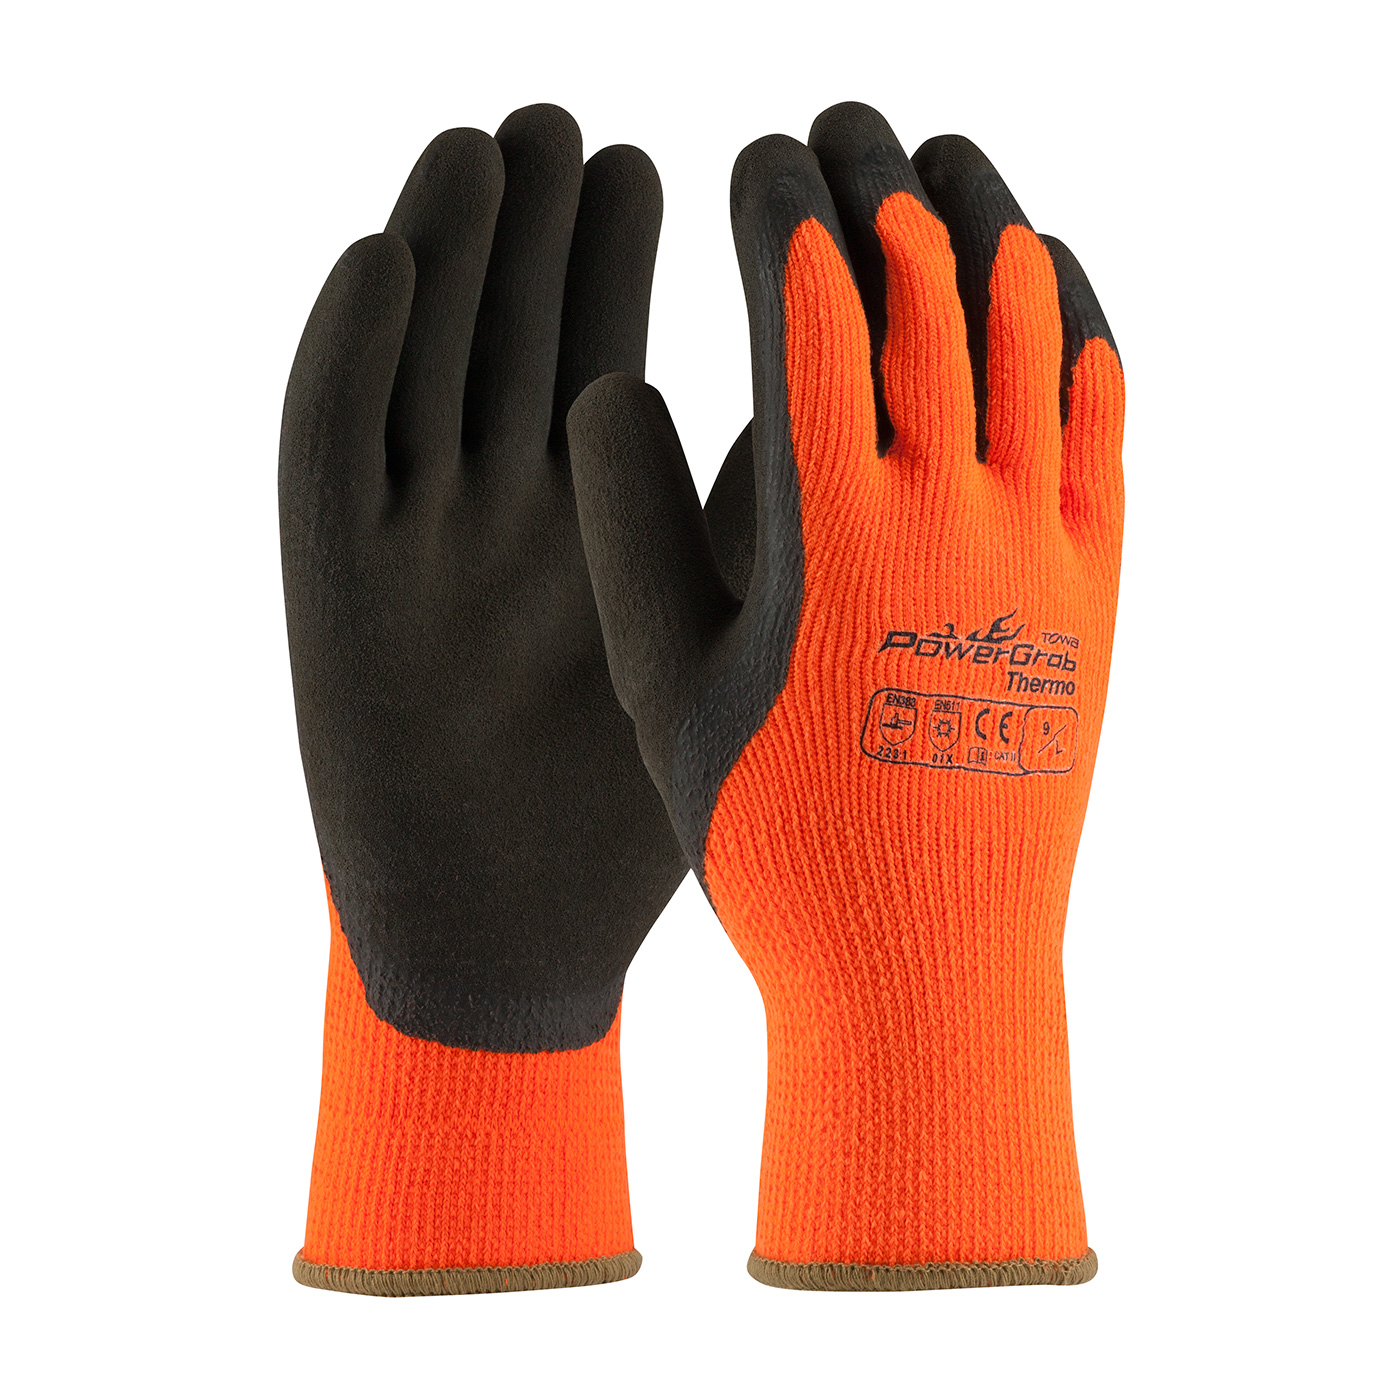 Gloves for Cold Weather